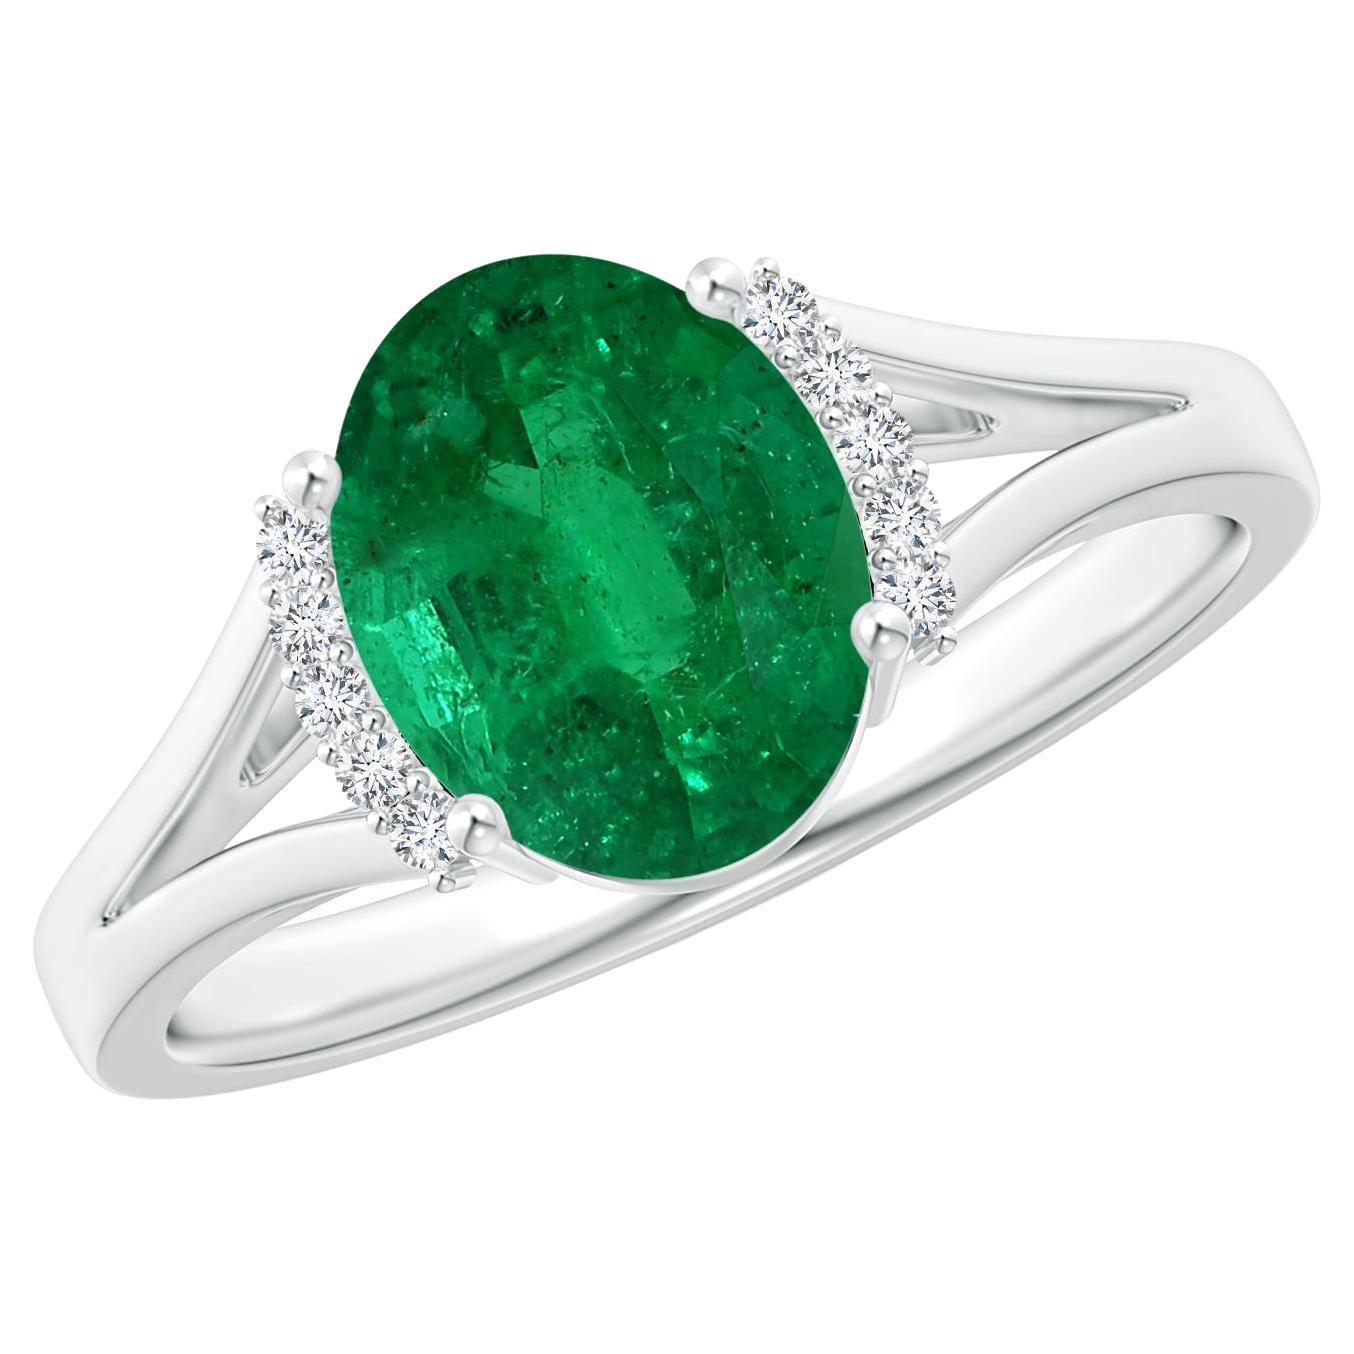 For Sale:  Angara Gia Certified Natural Emerald Ring in White Gold with Diamond Collar